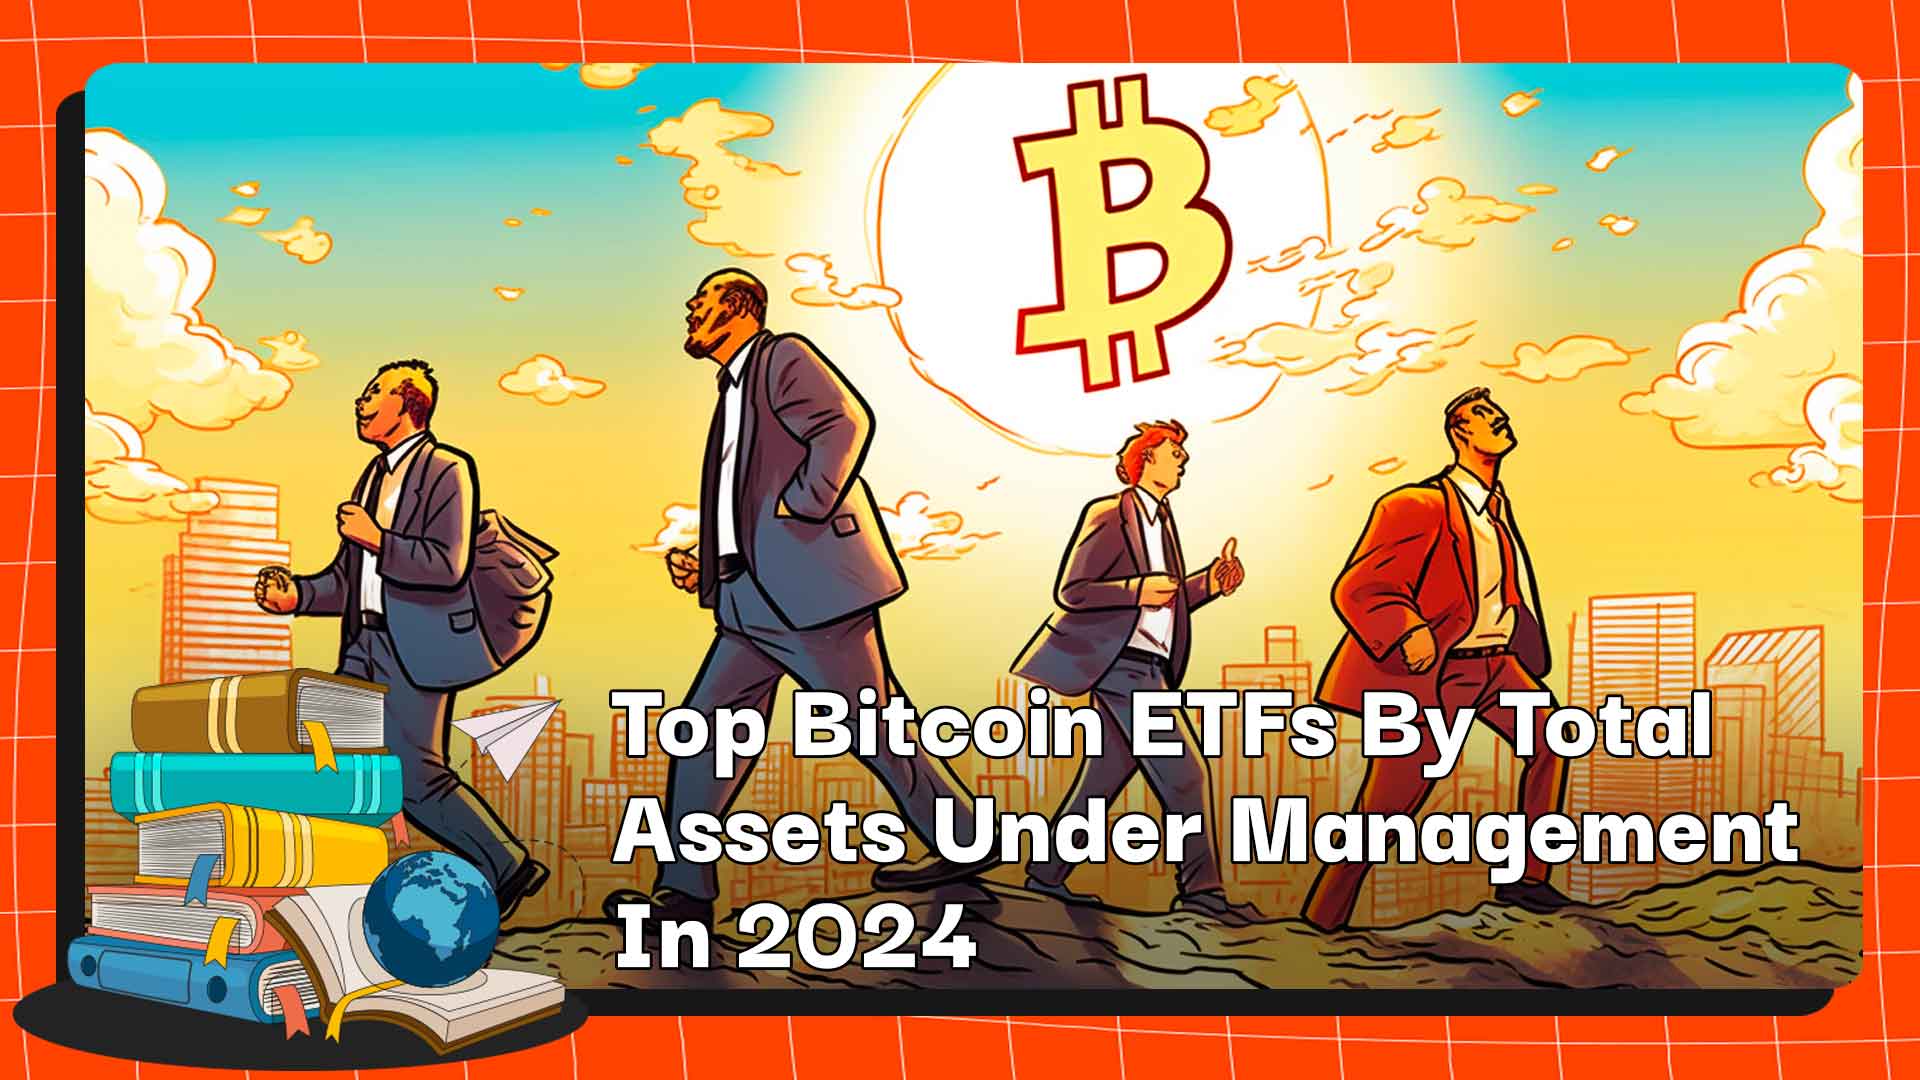 Top Bitcoin ETFs By Total Assets Under Management In 2024